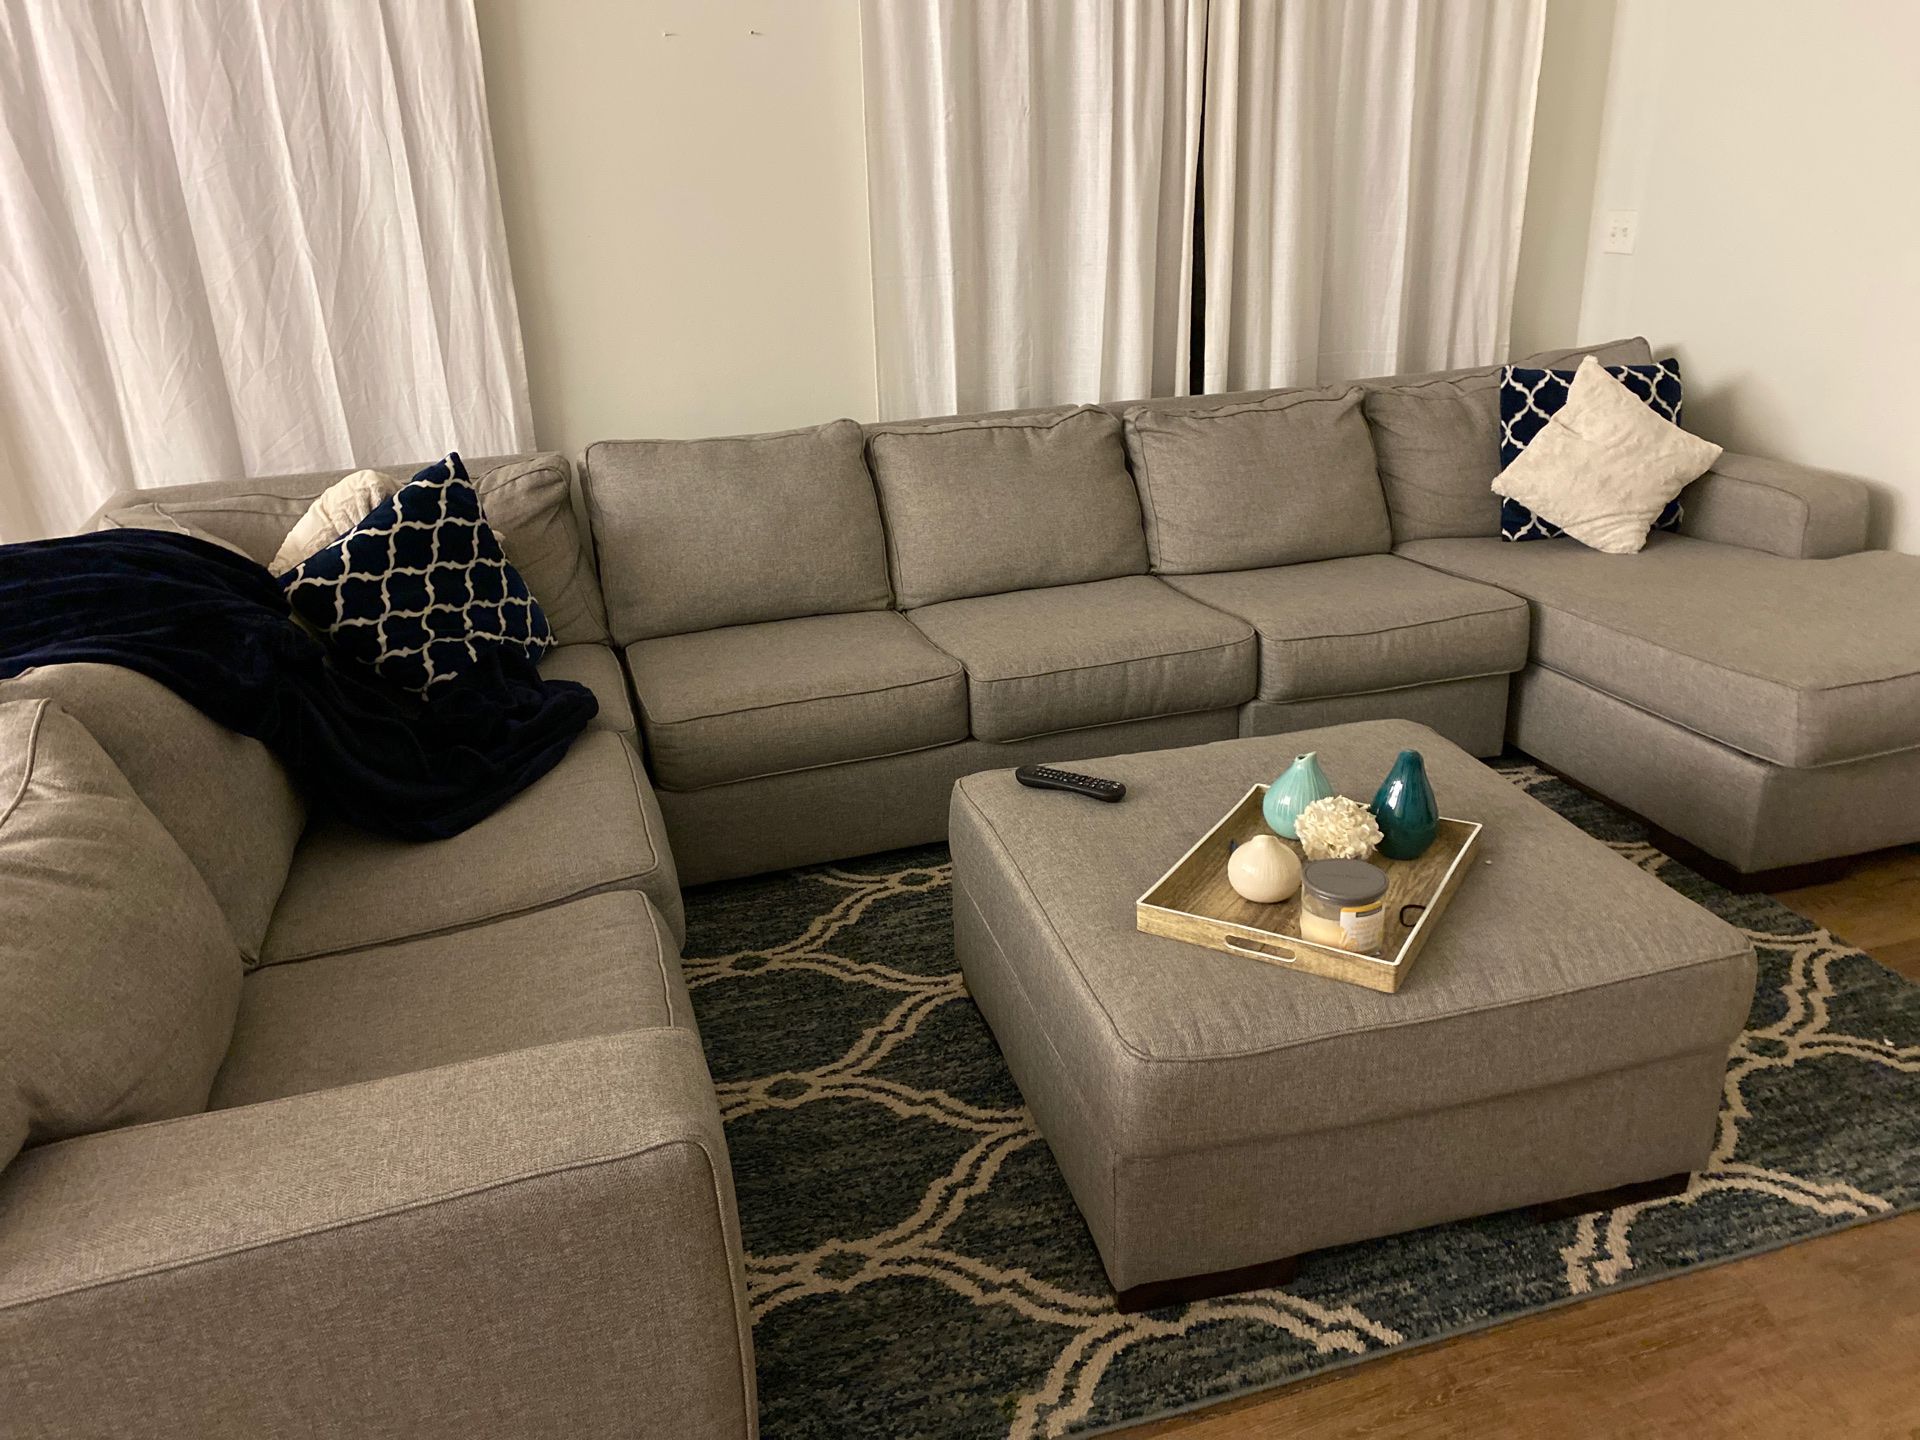 6 piece sectional couch including Ottoman